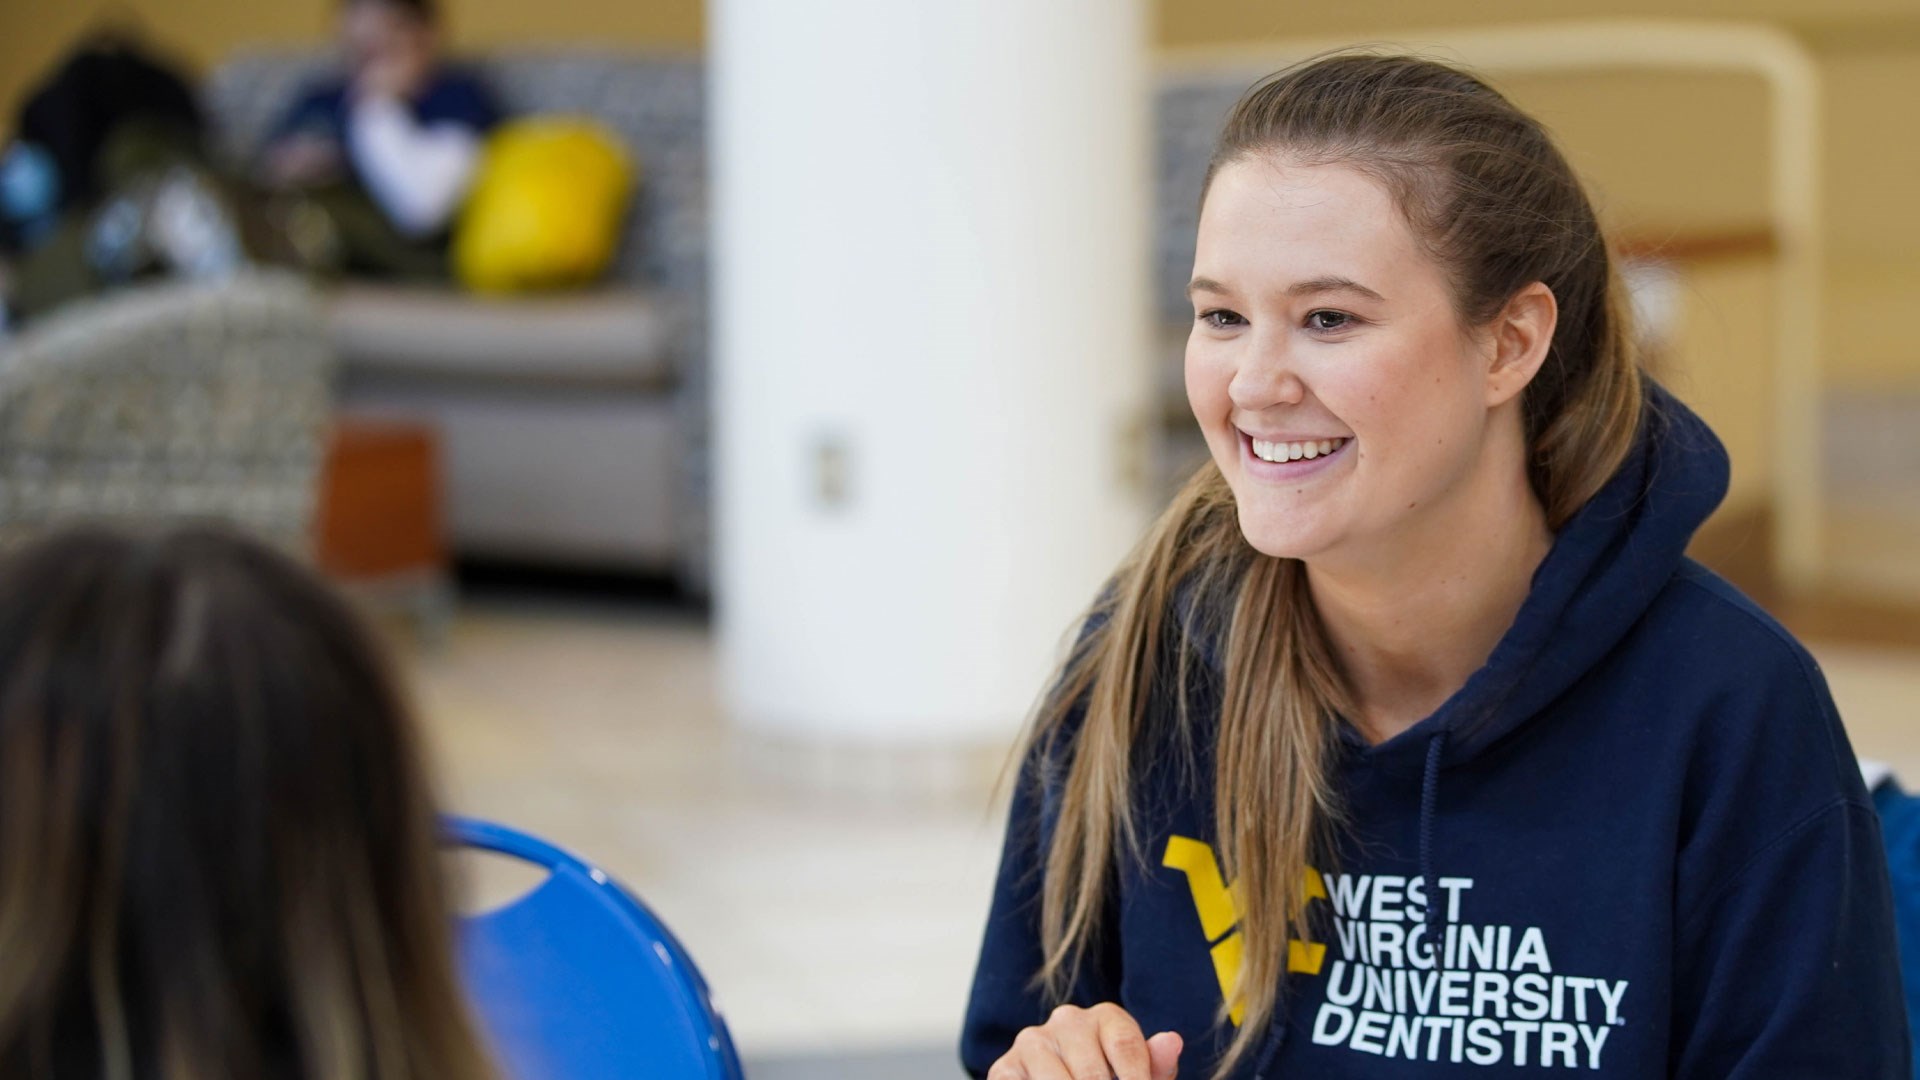 A person with long, brown hair smiles as they appear in the Pylons common area of the Health Sciences Center. They are wearing a dark blue West Virginia University hooded sweatshirt.